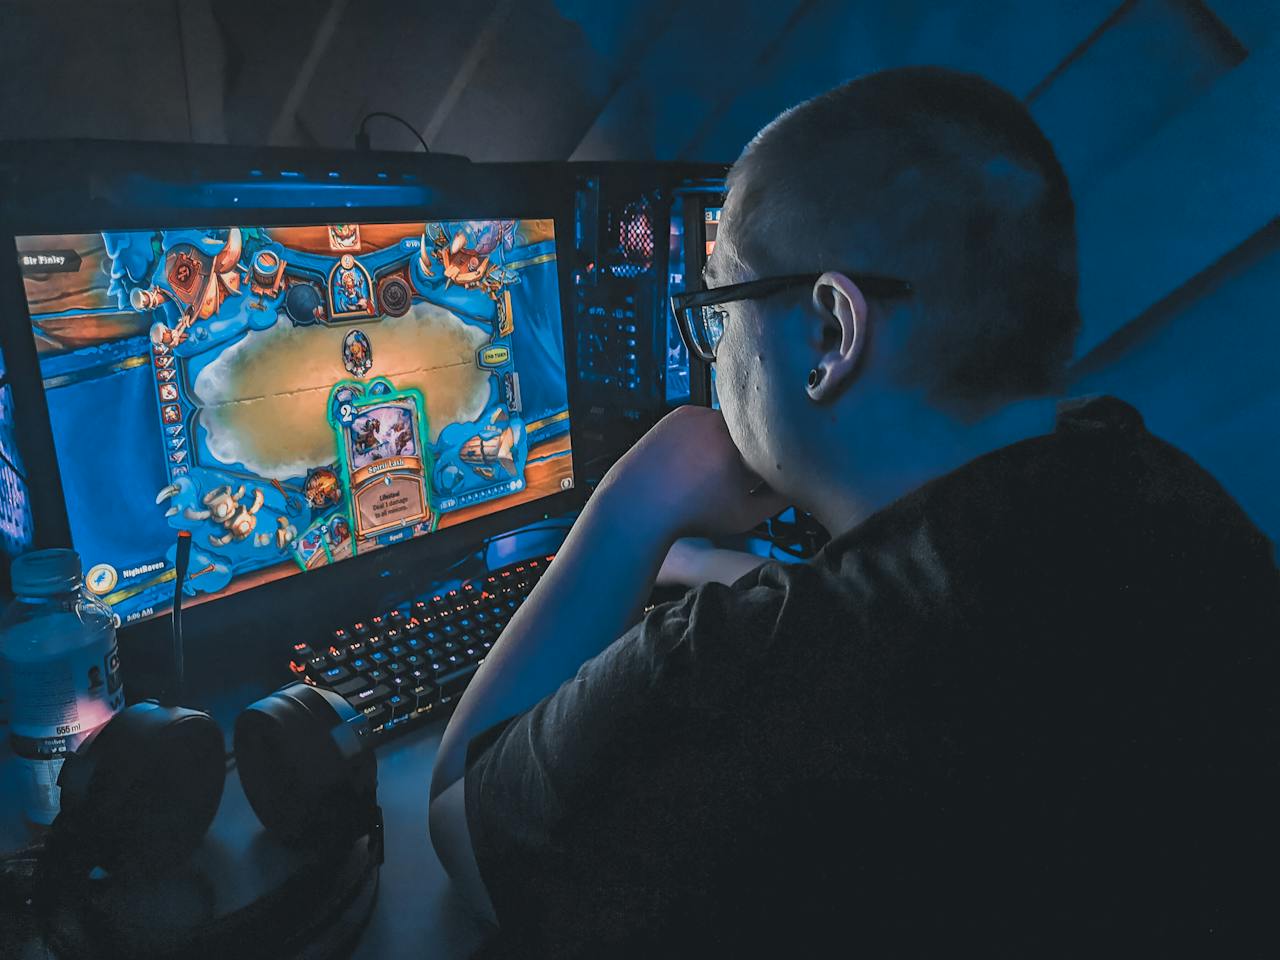 The Most Important Equipment Players Need for Online Gaming